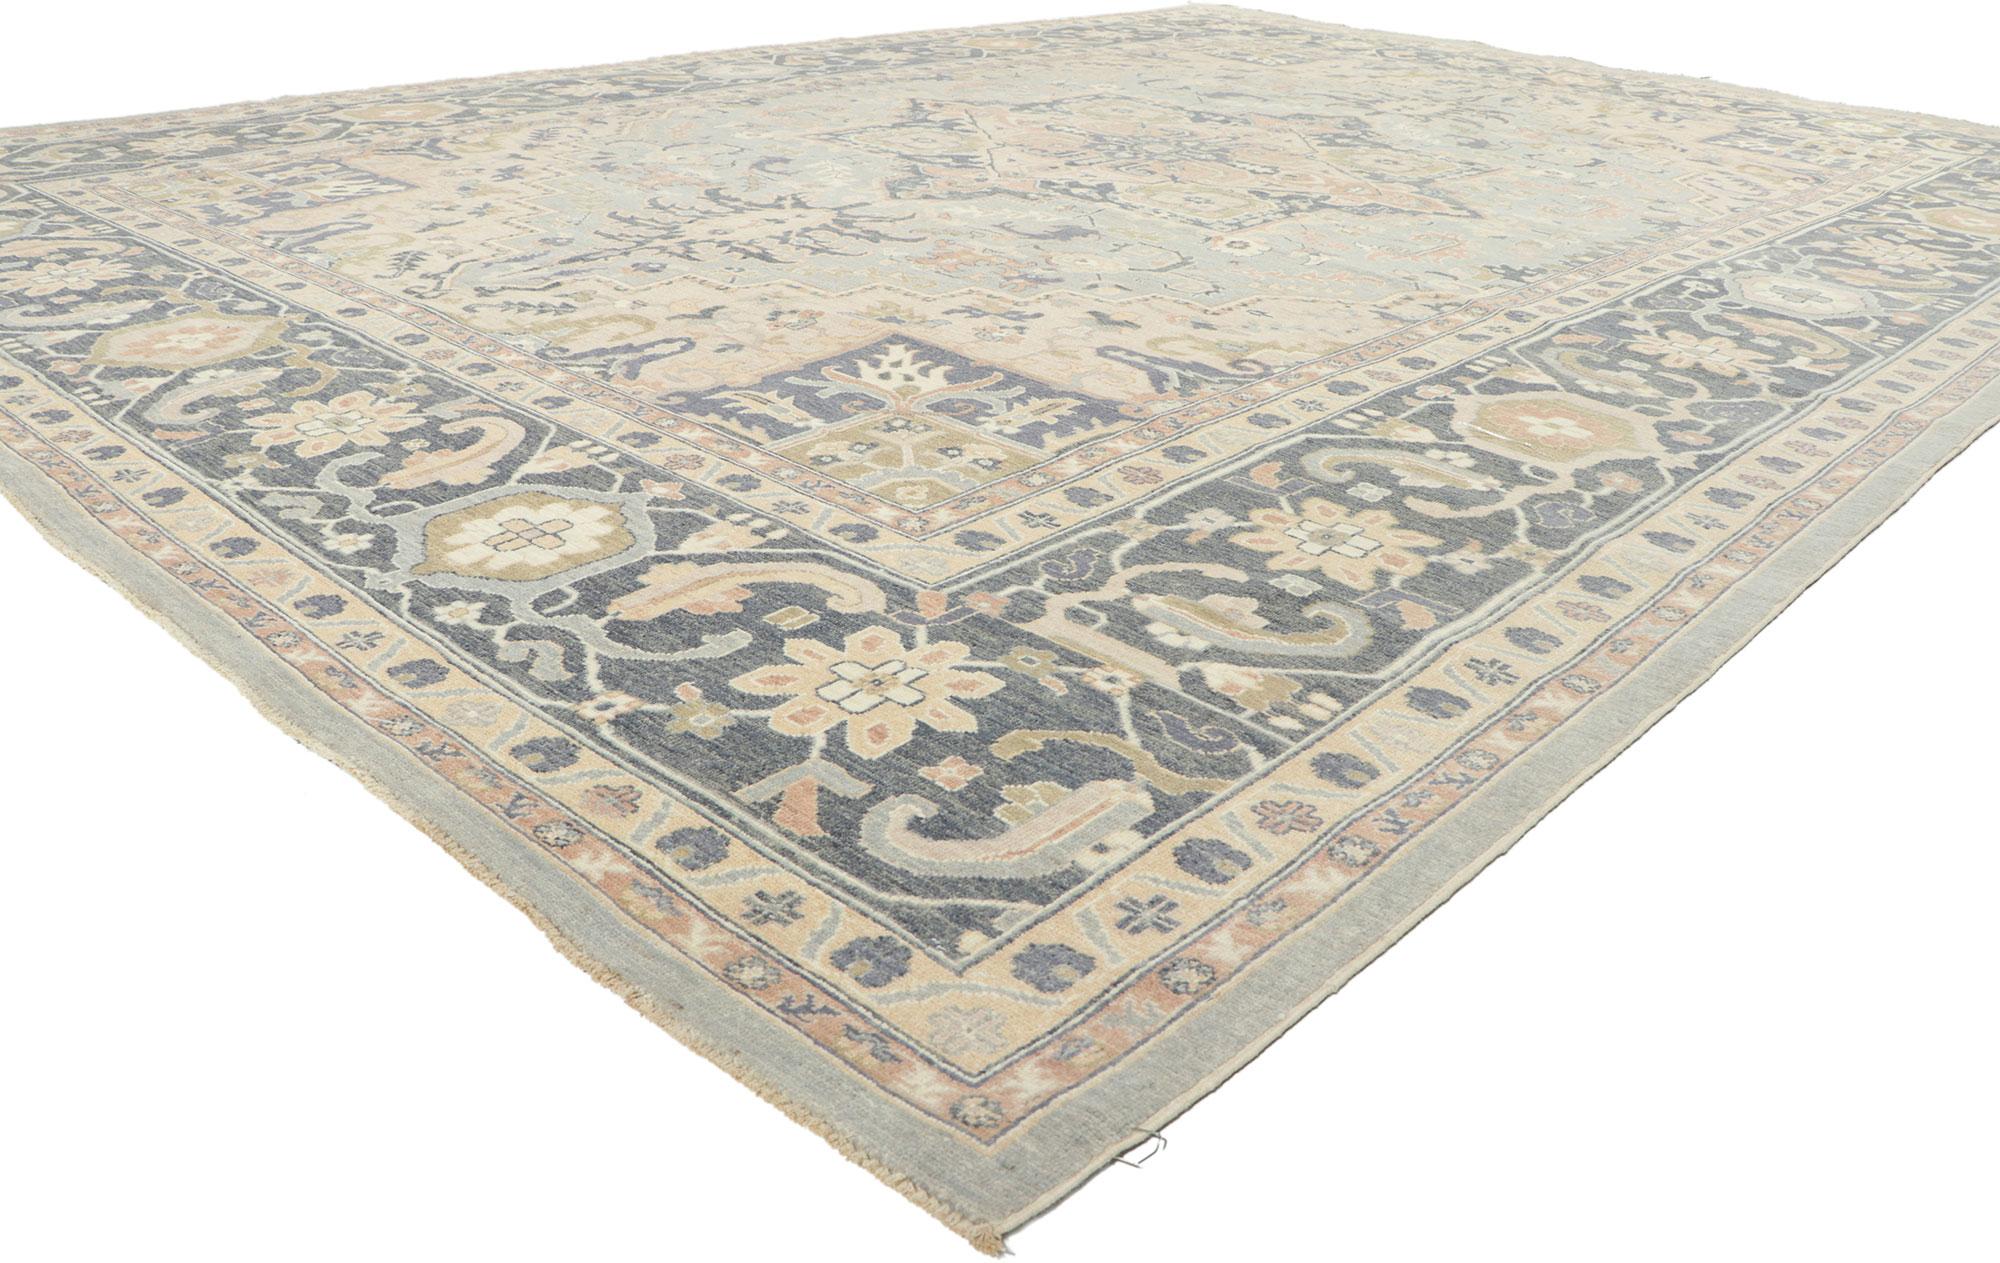 80944 New Contemporary oushak rug with Modern style, measures: 10'00 x 13'09.